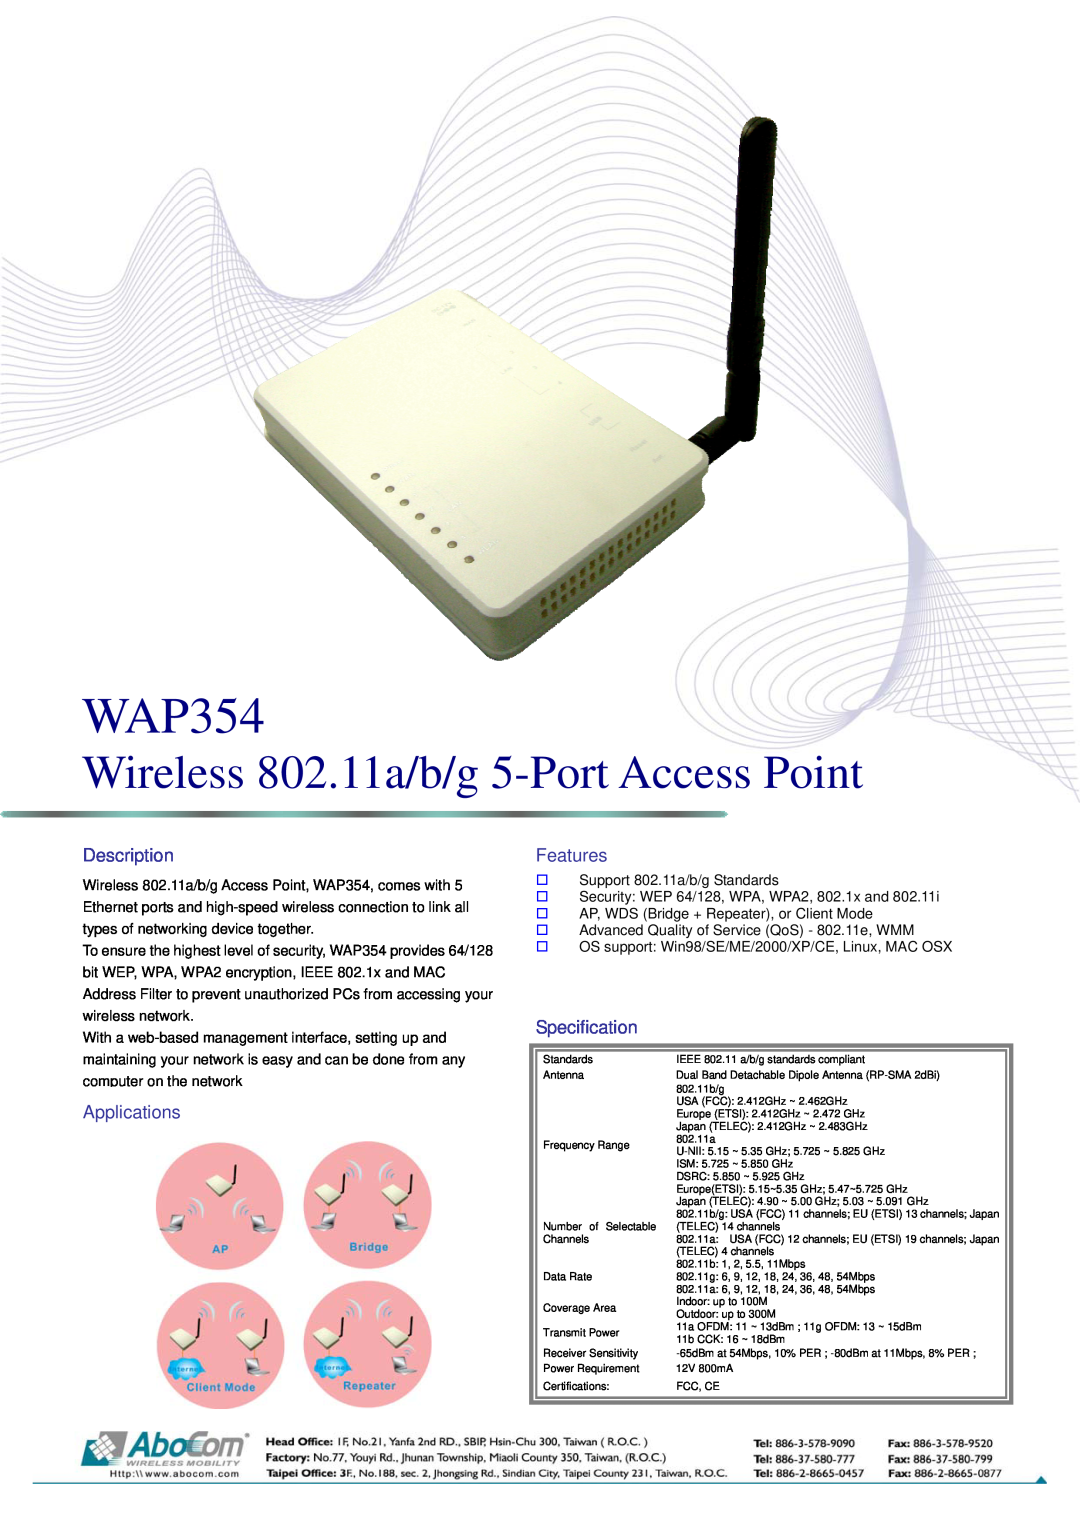 Abocom WAP354 specifications Wireless 802.11a/b/g 5-Port Access Point, Description, Applications, Features, Specification 